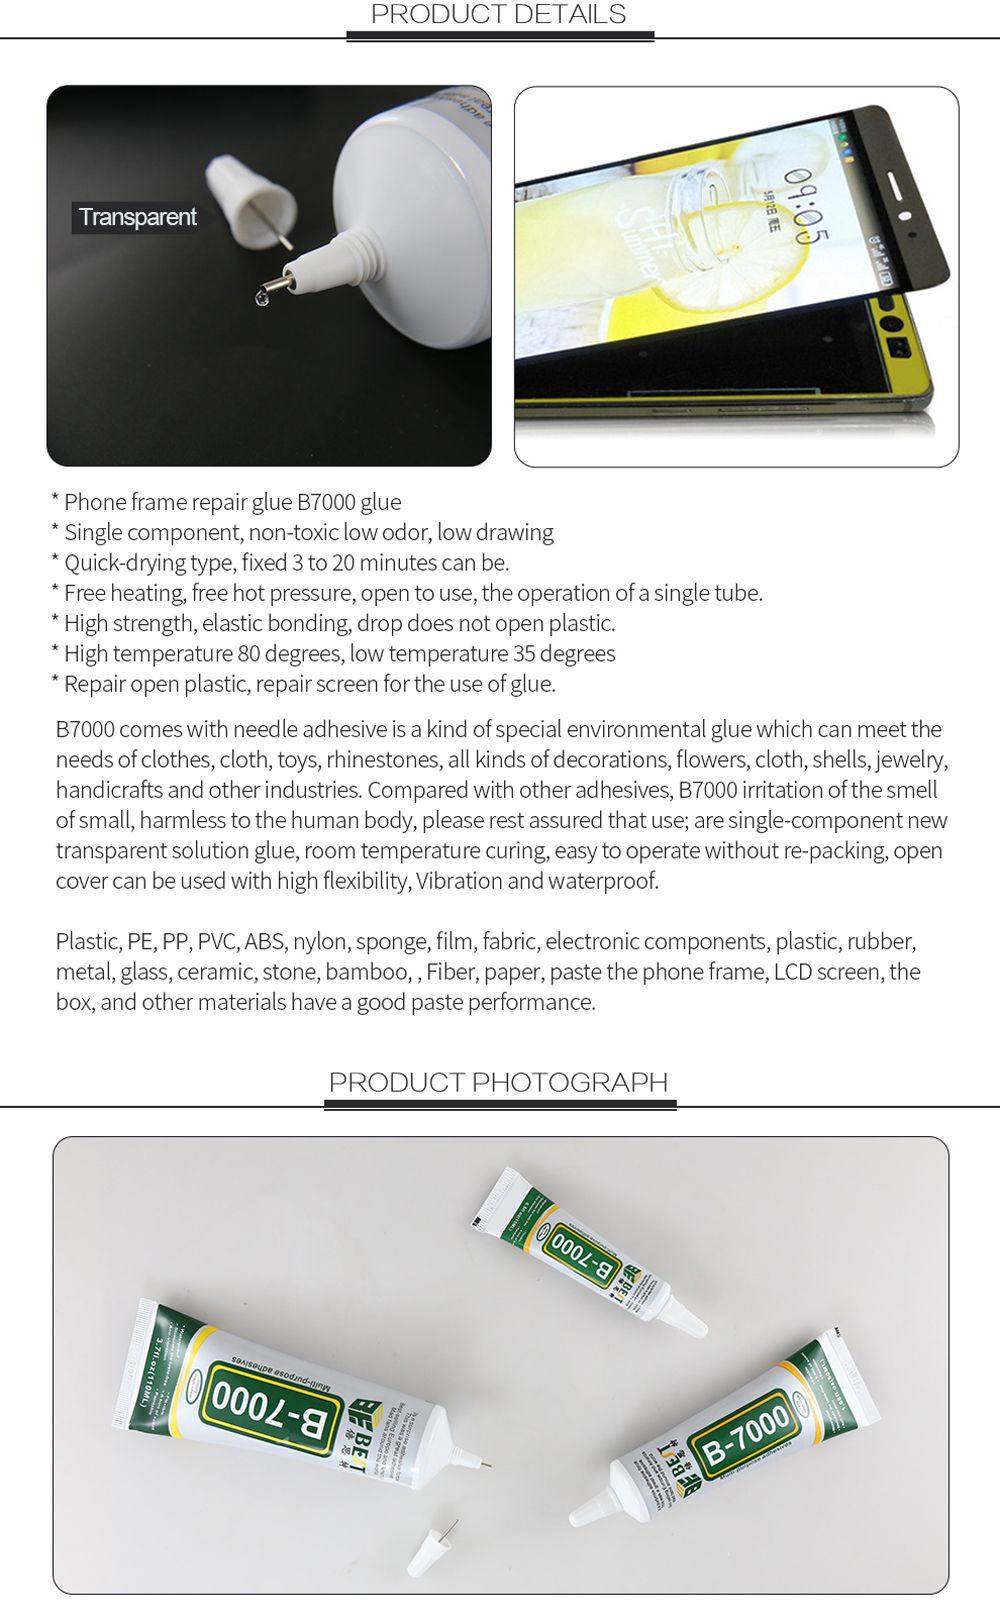 BEST-B-7000-Multi-Purpose-Adhesive-Glue-Epoxy-Resin-Diy-Crafts-Glass-Touch-Screen-Cell-Phone-Super-G-1351880